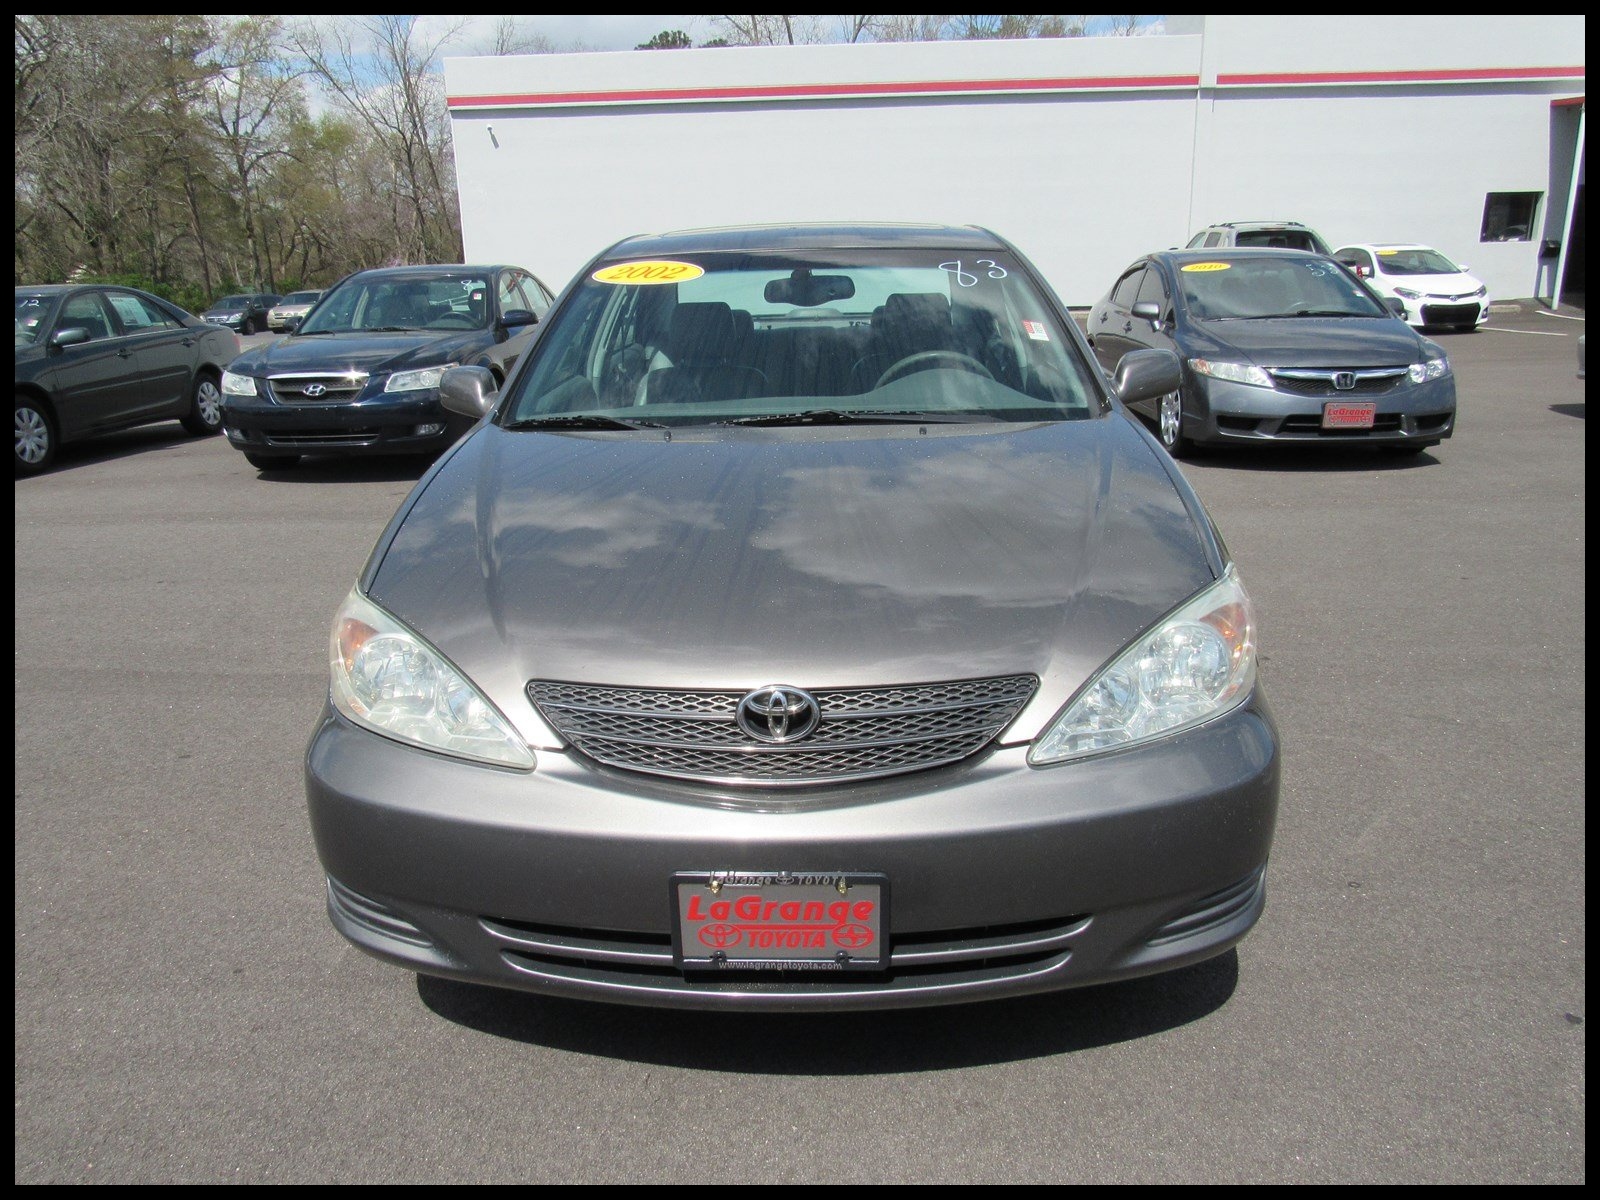 2002 toyota Camry Value Pre Owned 2002 toyota Camry 4dr Sdn Xle V6 Auto Sedan In